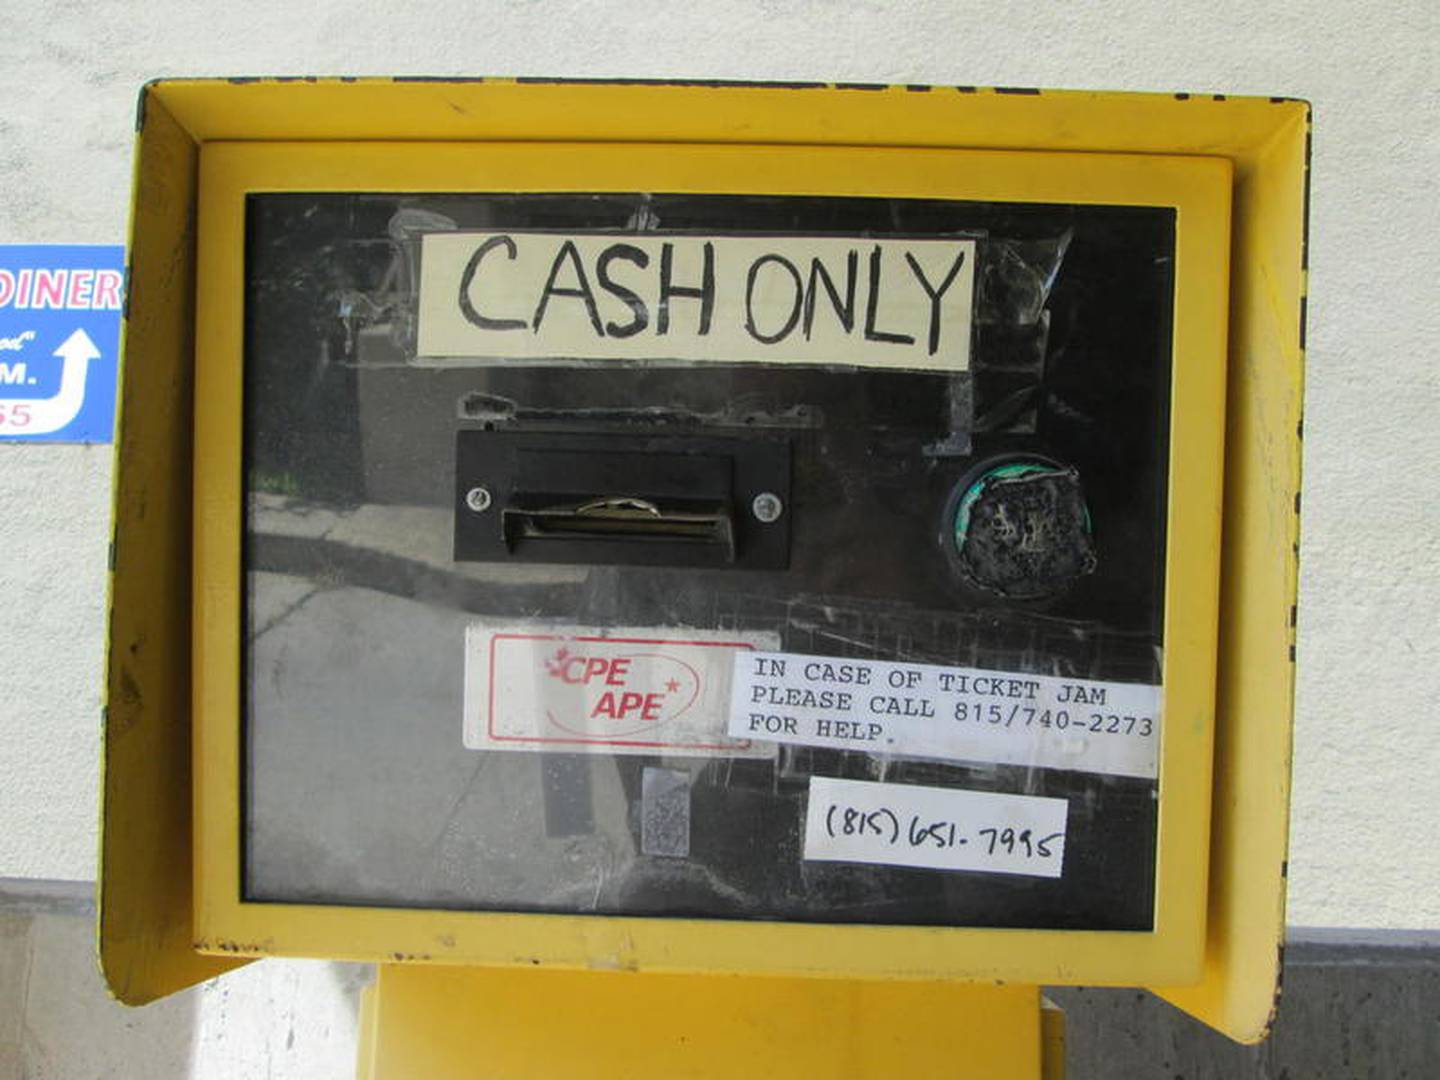 The ticket dispenser warns customers entering the Ottawa Street parking deck that it's a cash-only payment system.